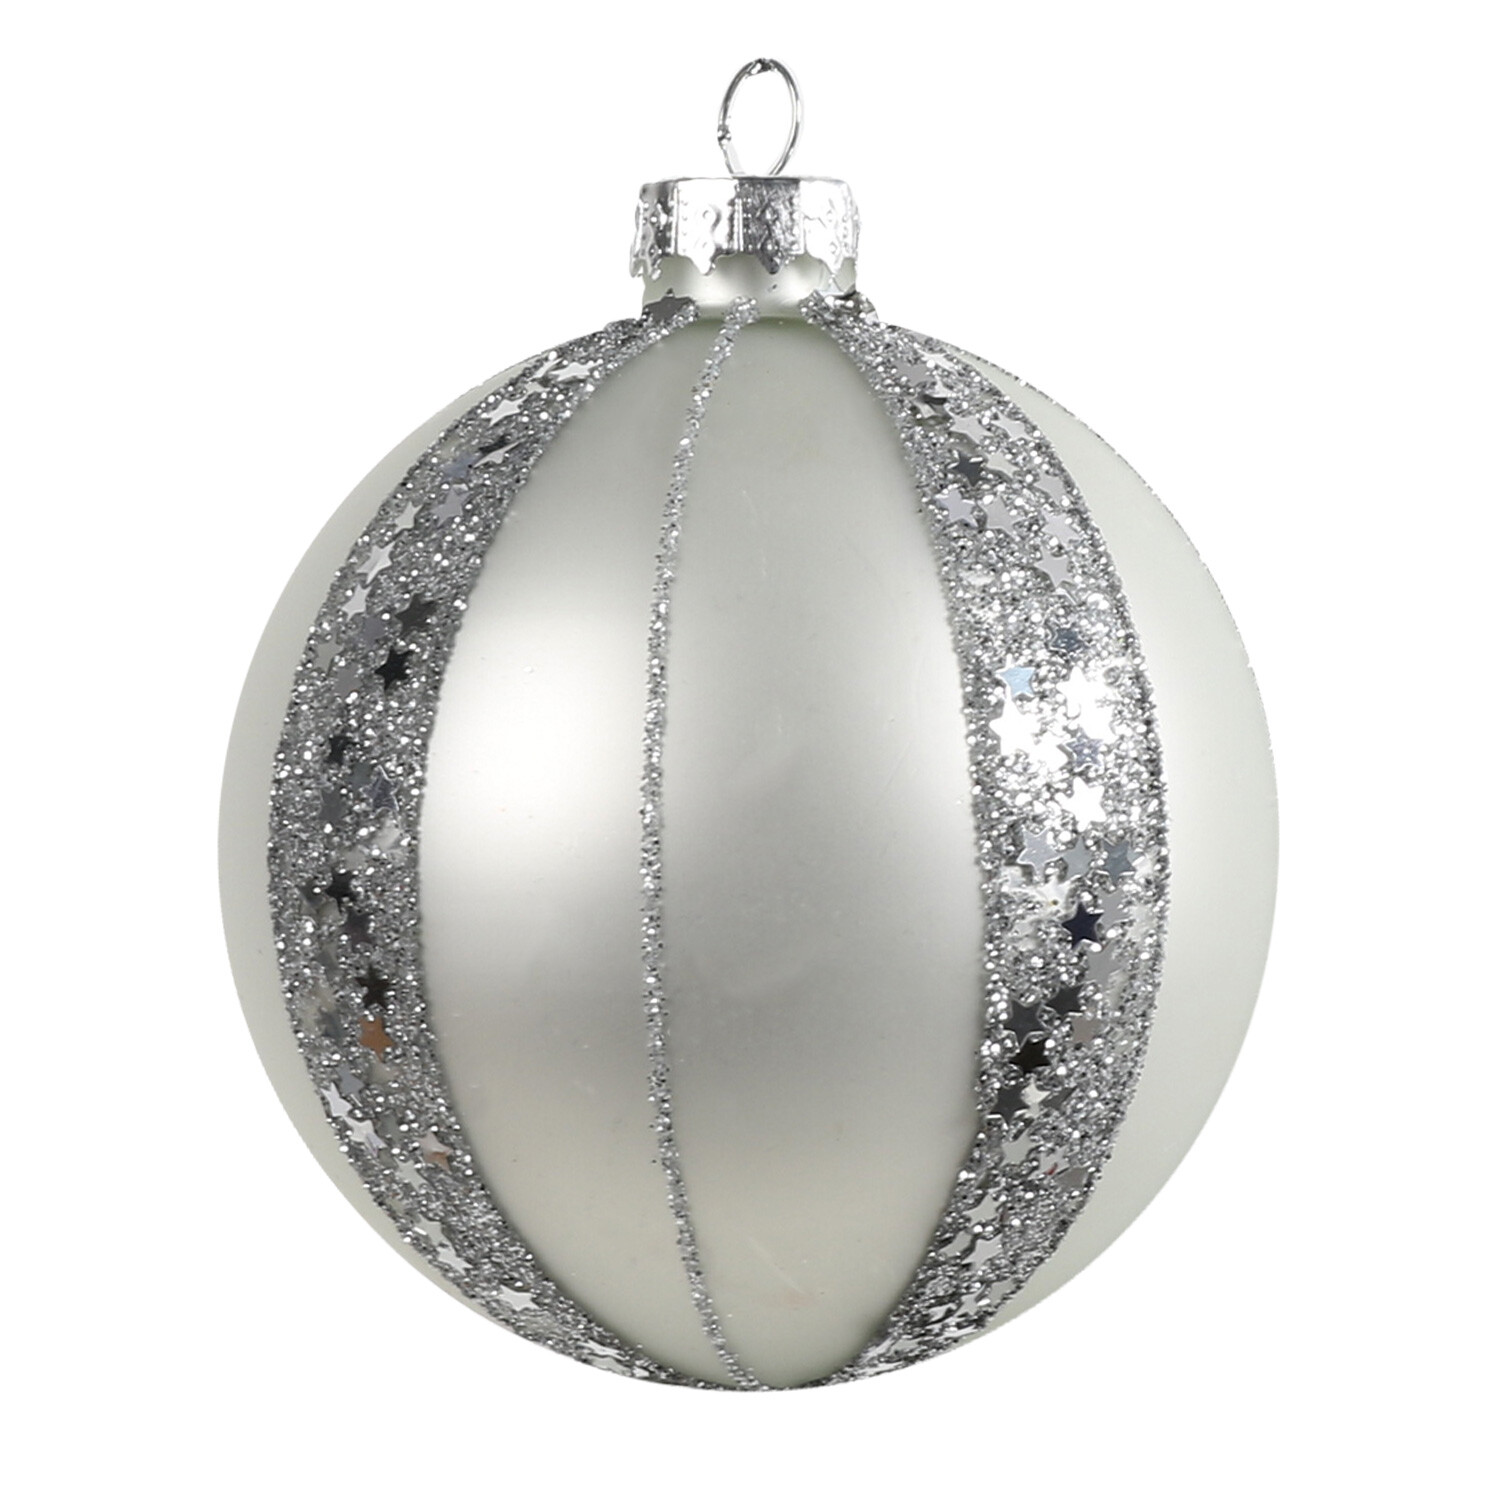 Single Chic Noir Matte Silver Glitter Ridged Bauble in Assorted styles Image 2